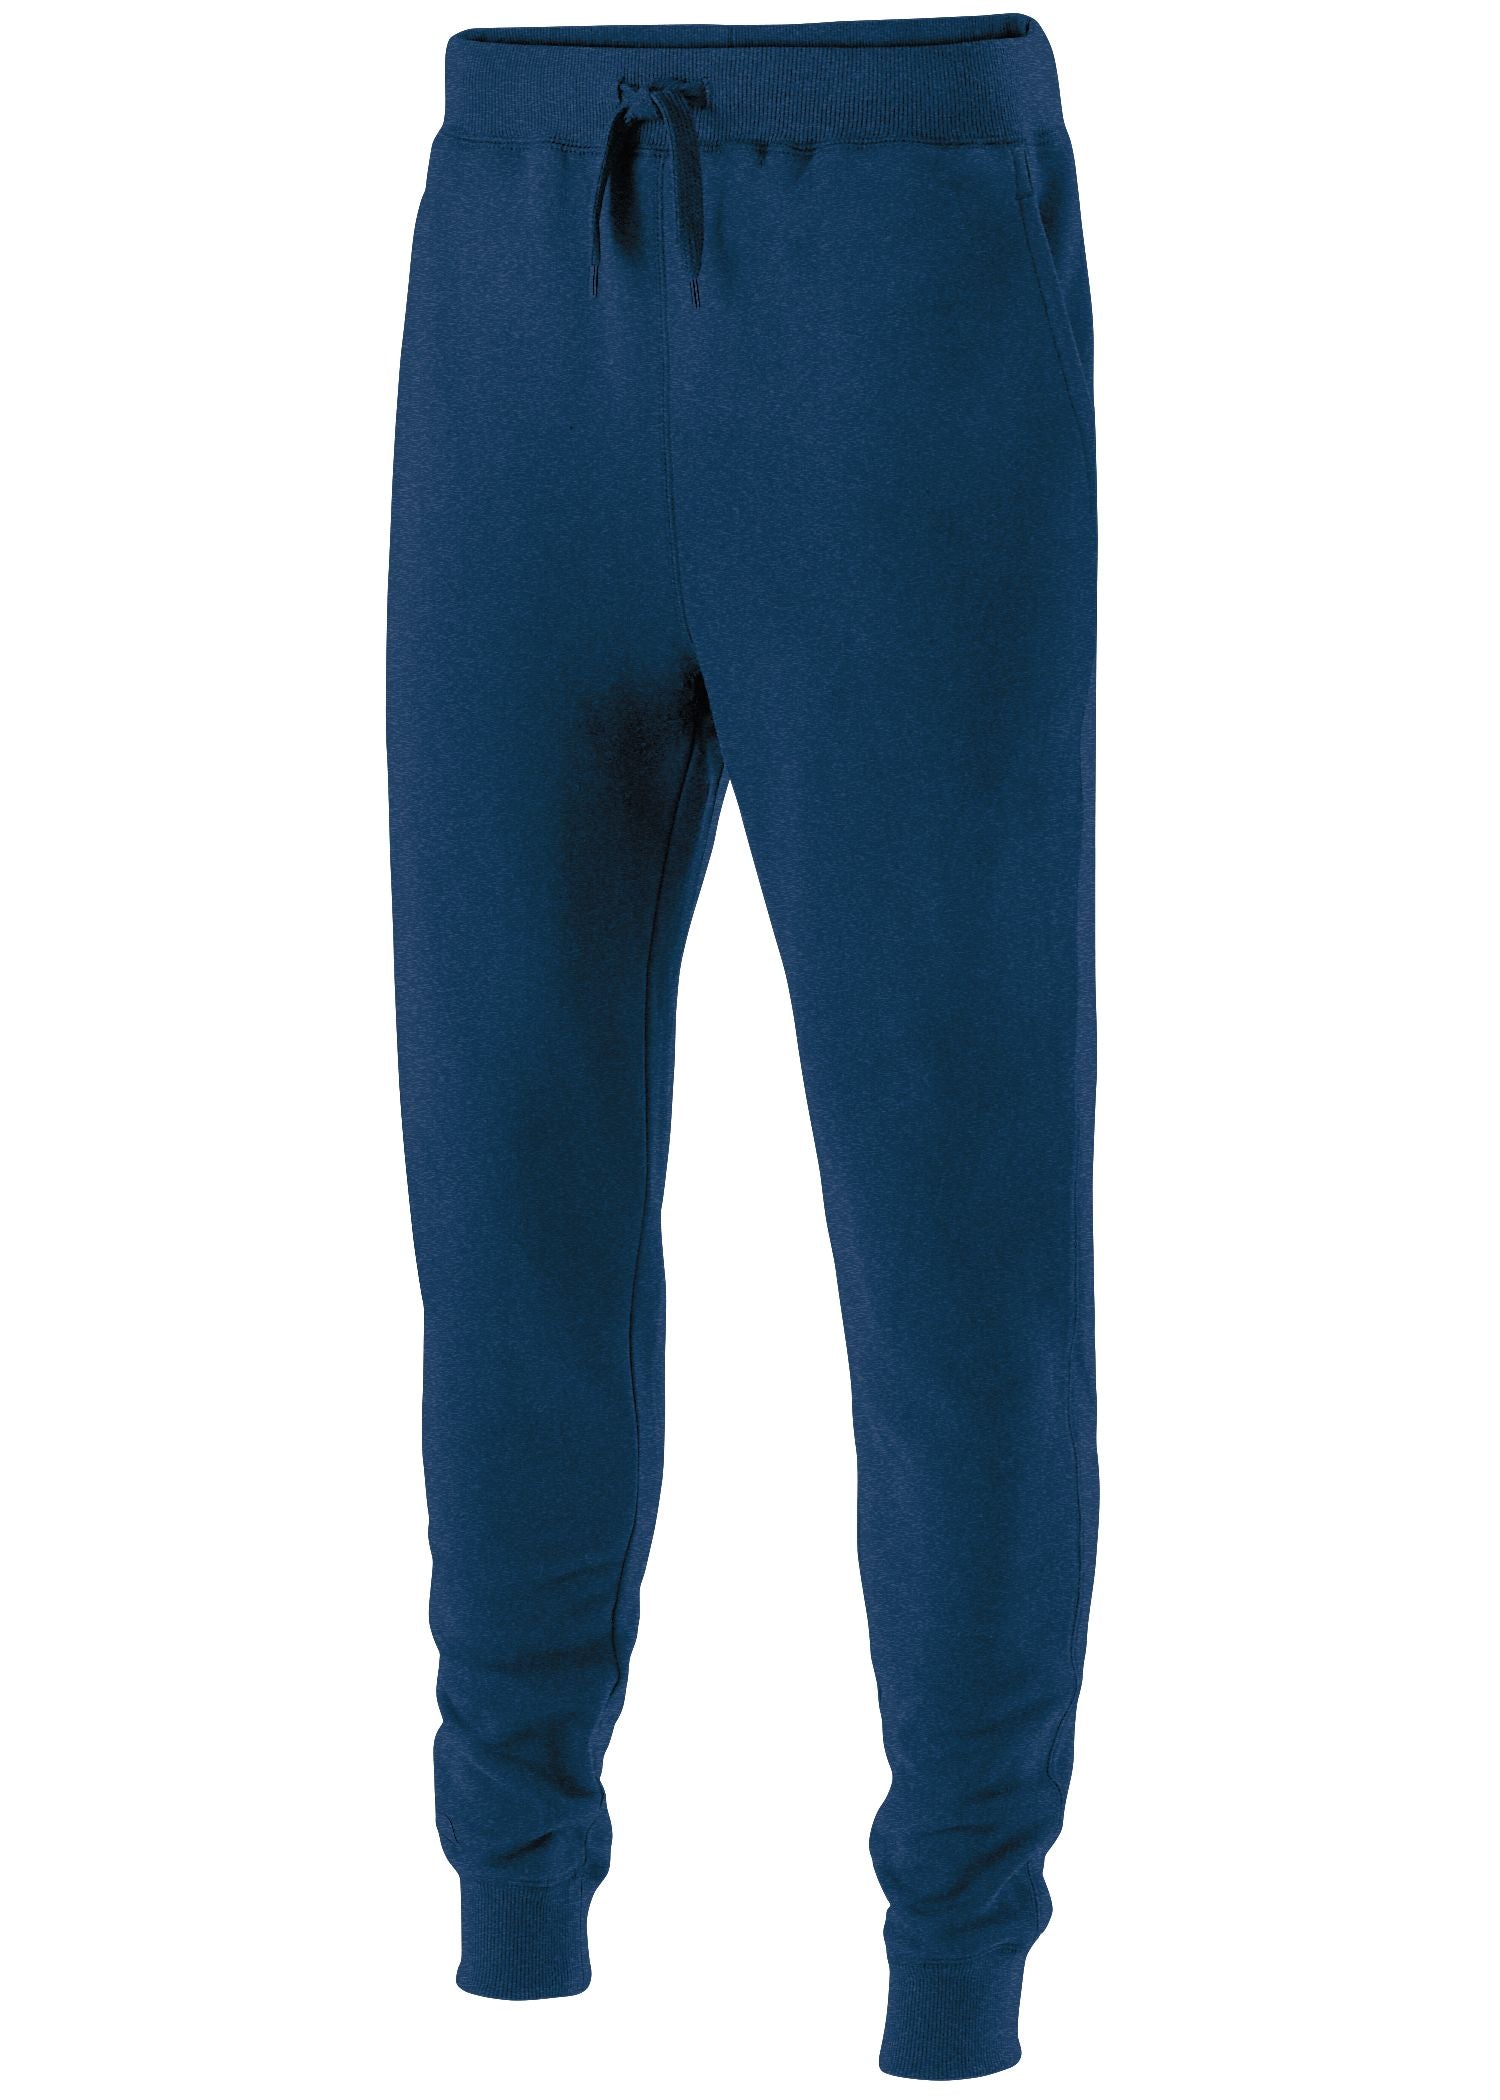 Holloway 60/40 Fleece Jogger in Navy  -Part of the Adult, Holloway product lines at KanaleyCreations.com